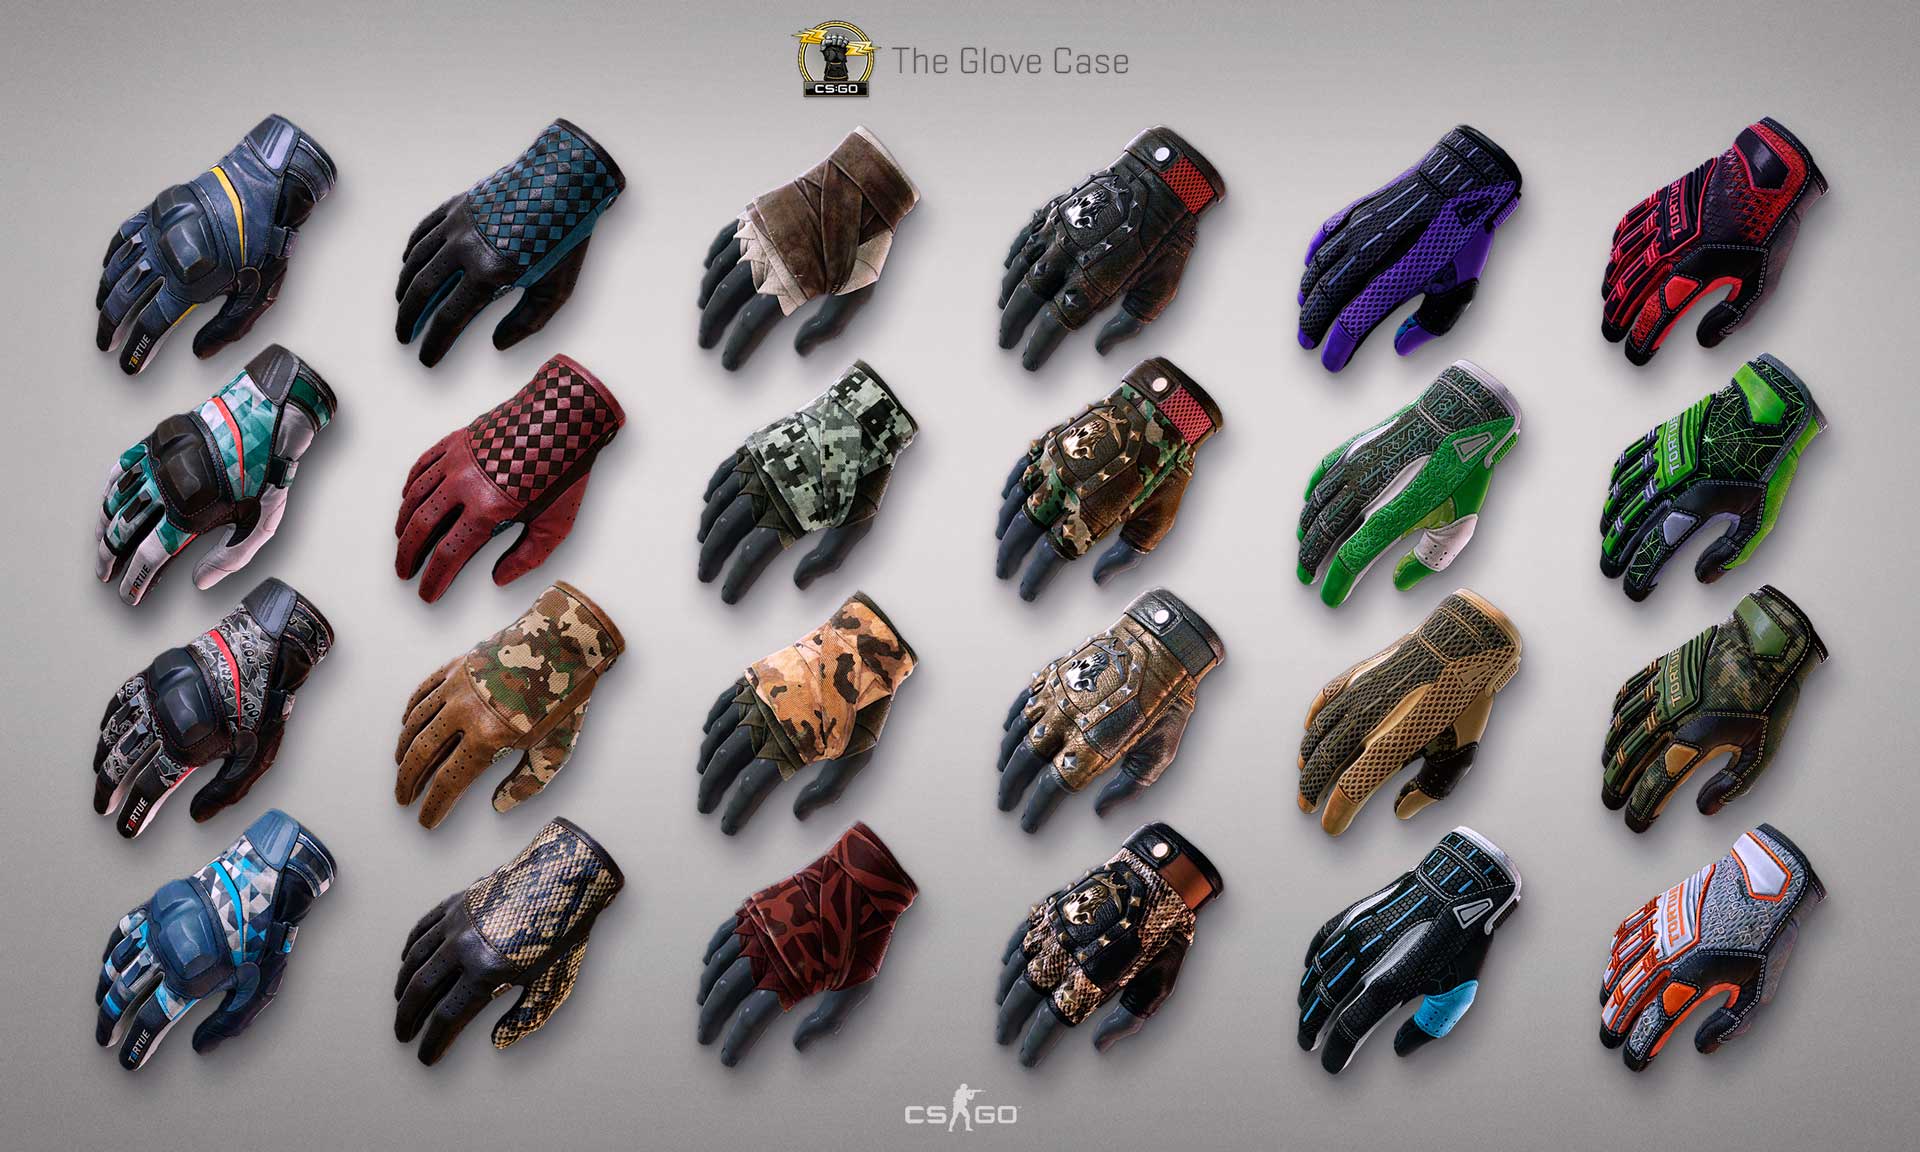 brothers in arms guantes-2016-1